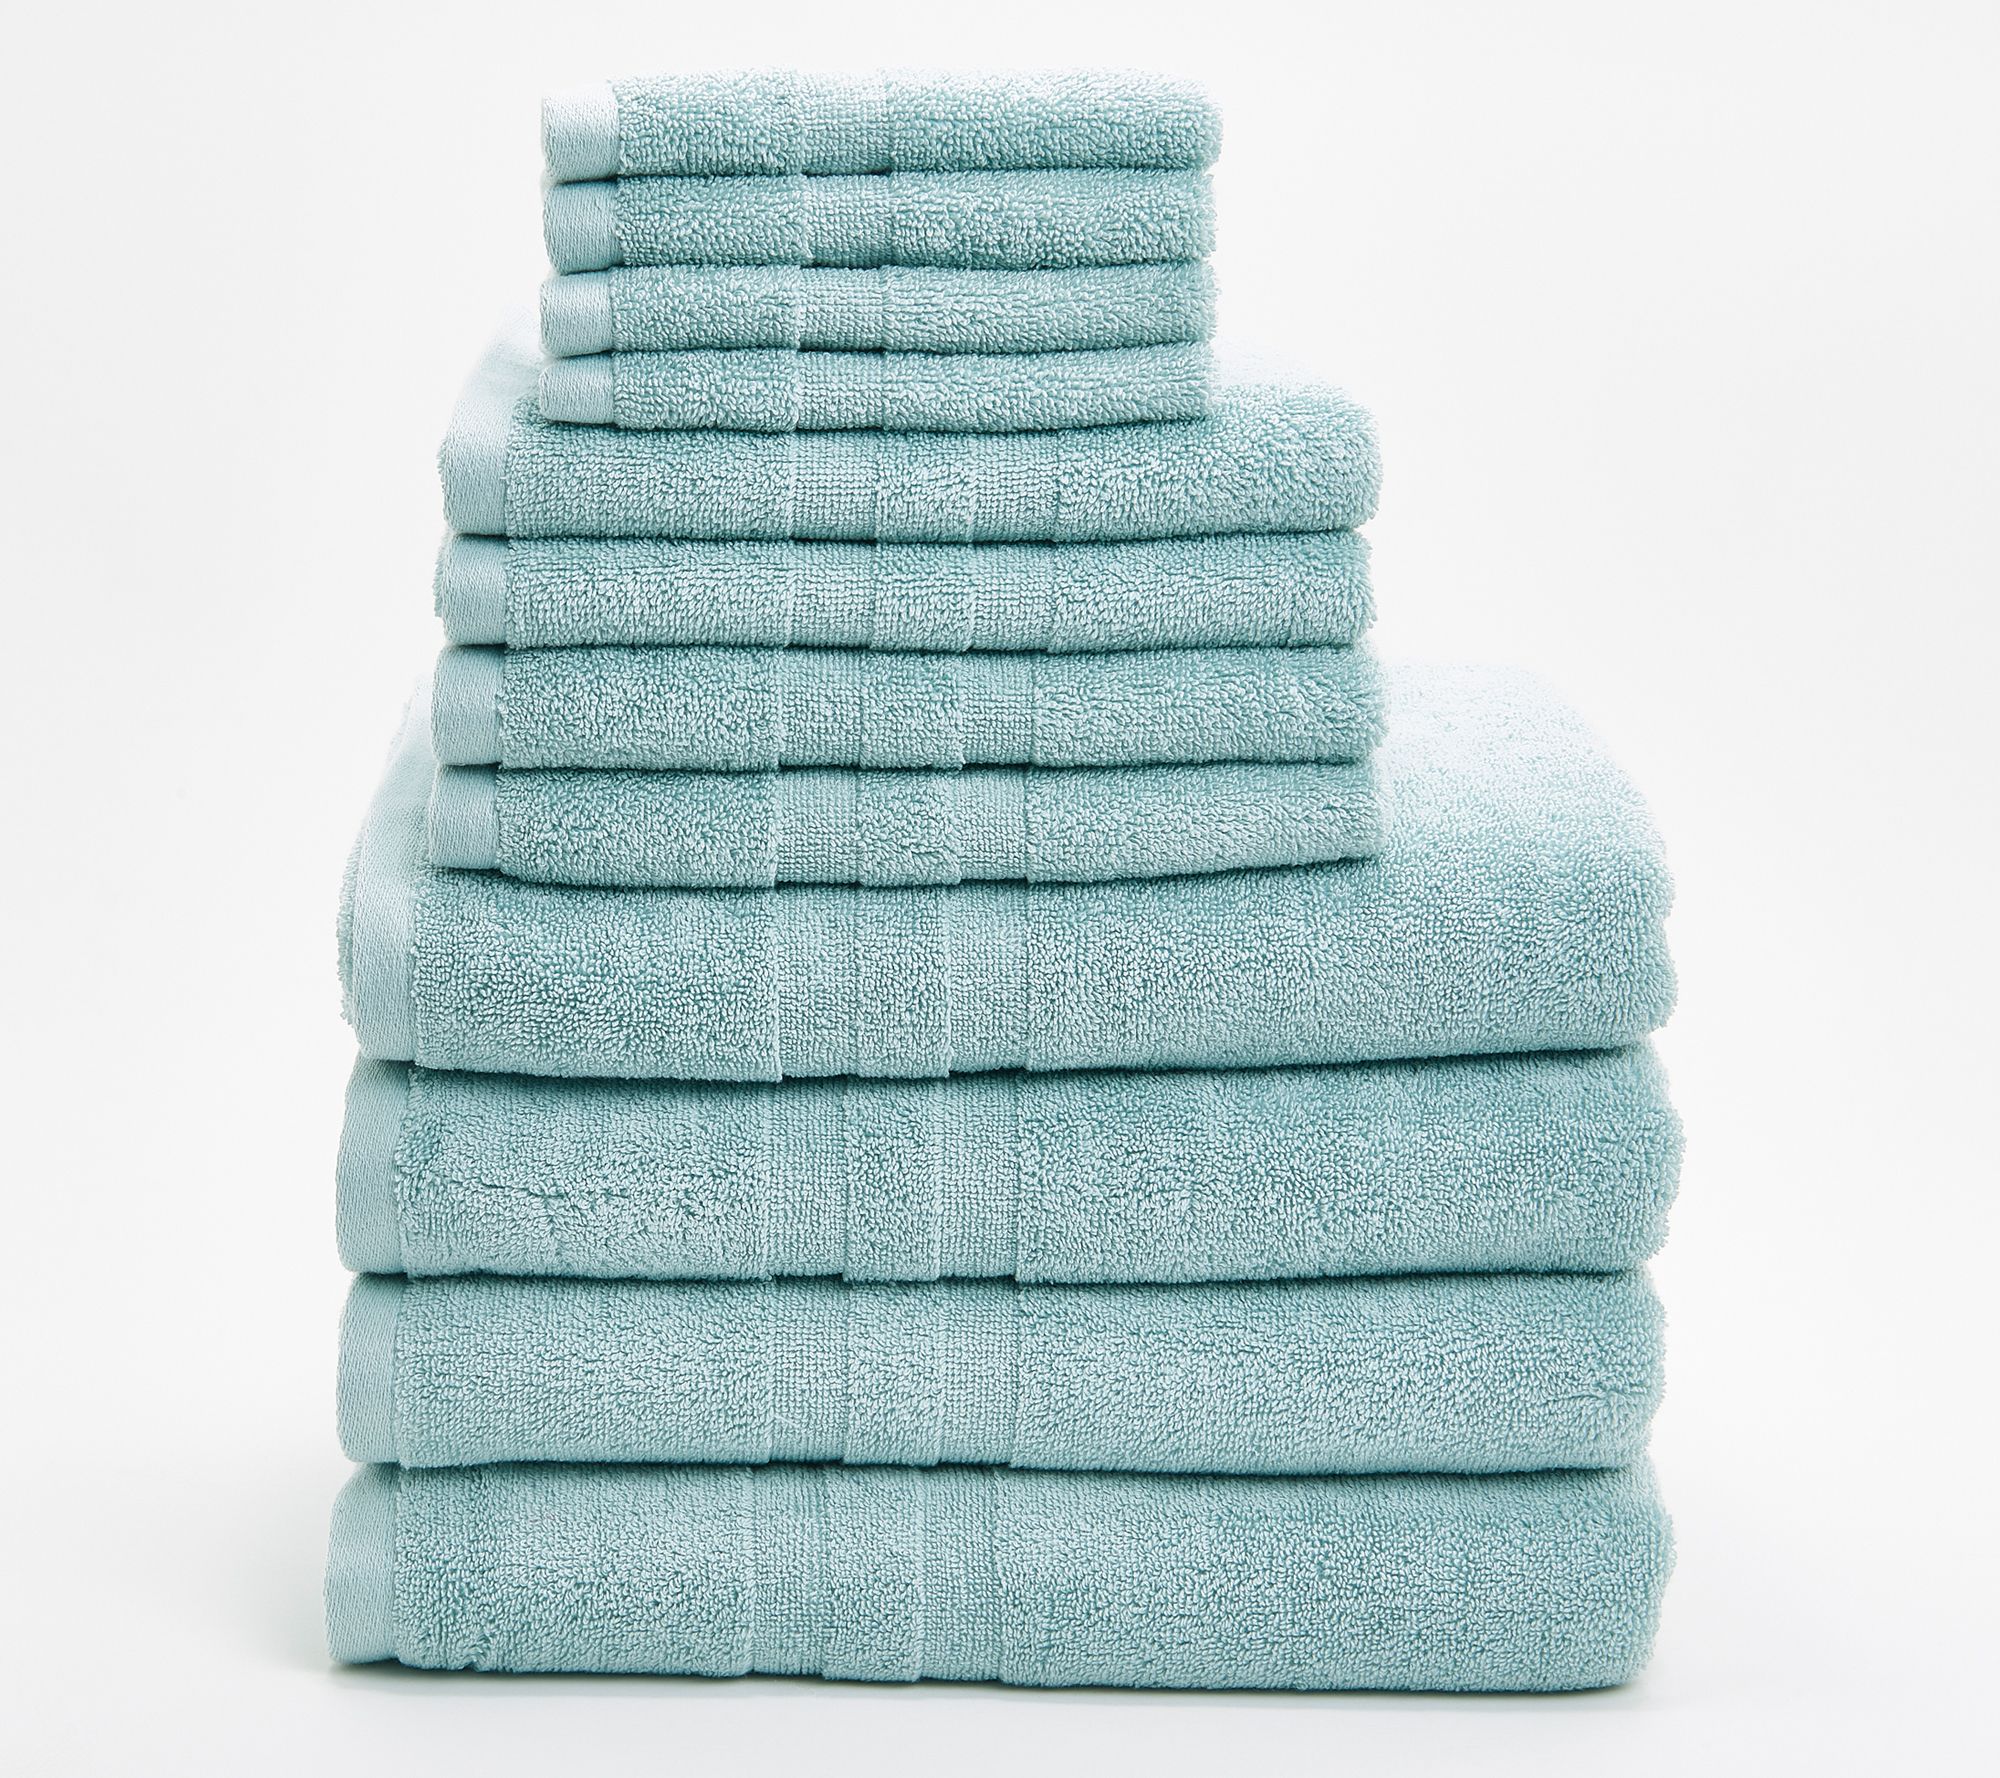 Martex-The Clean Towel-Antimicrobial Towels